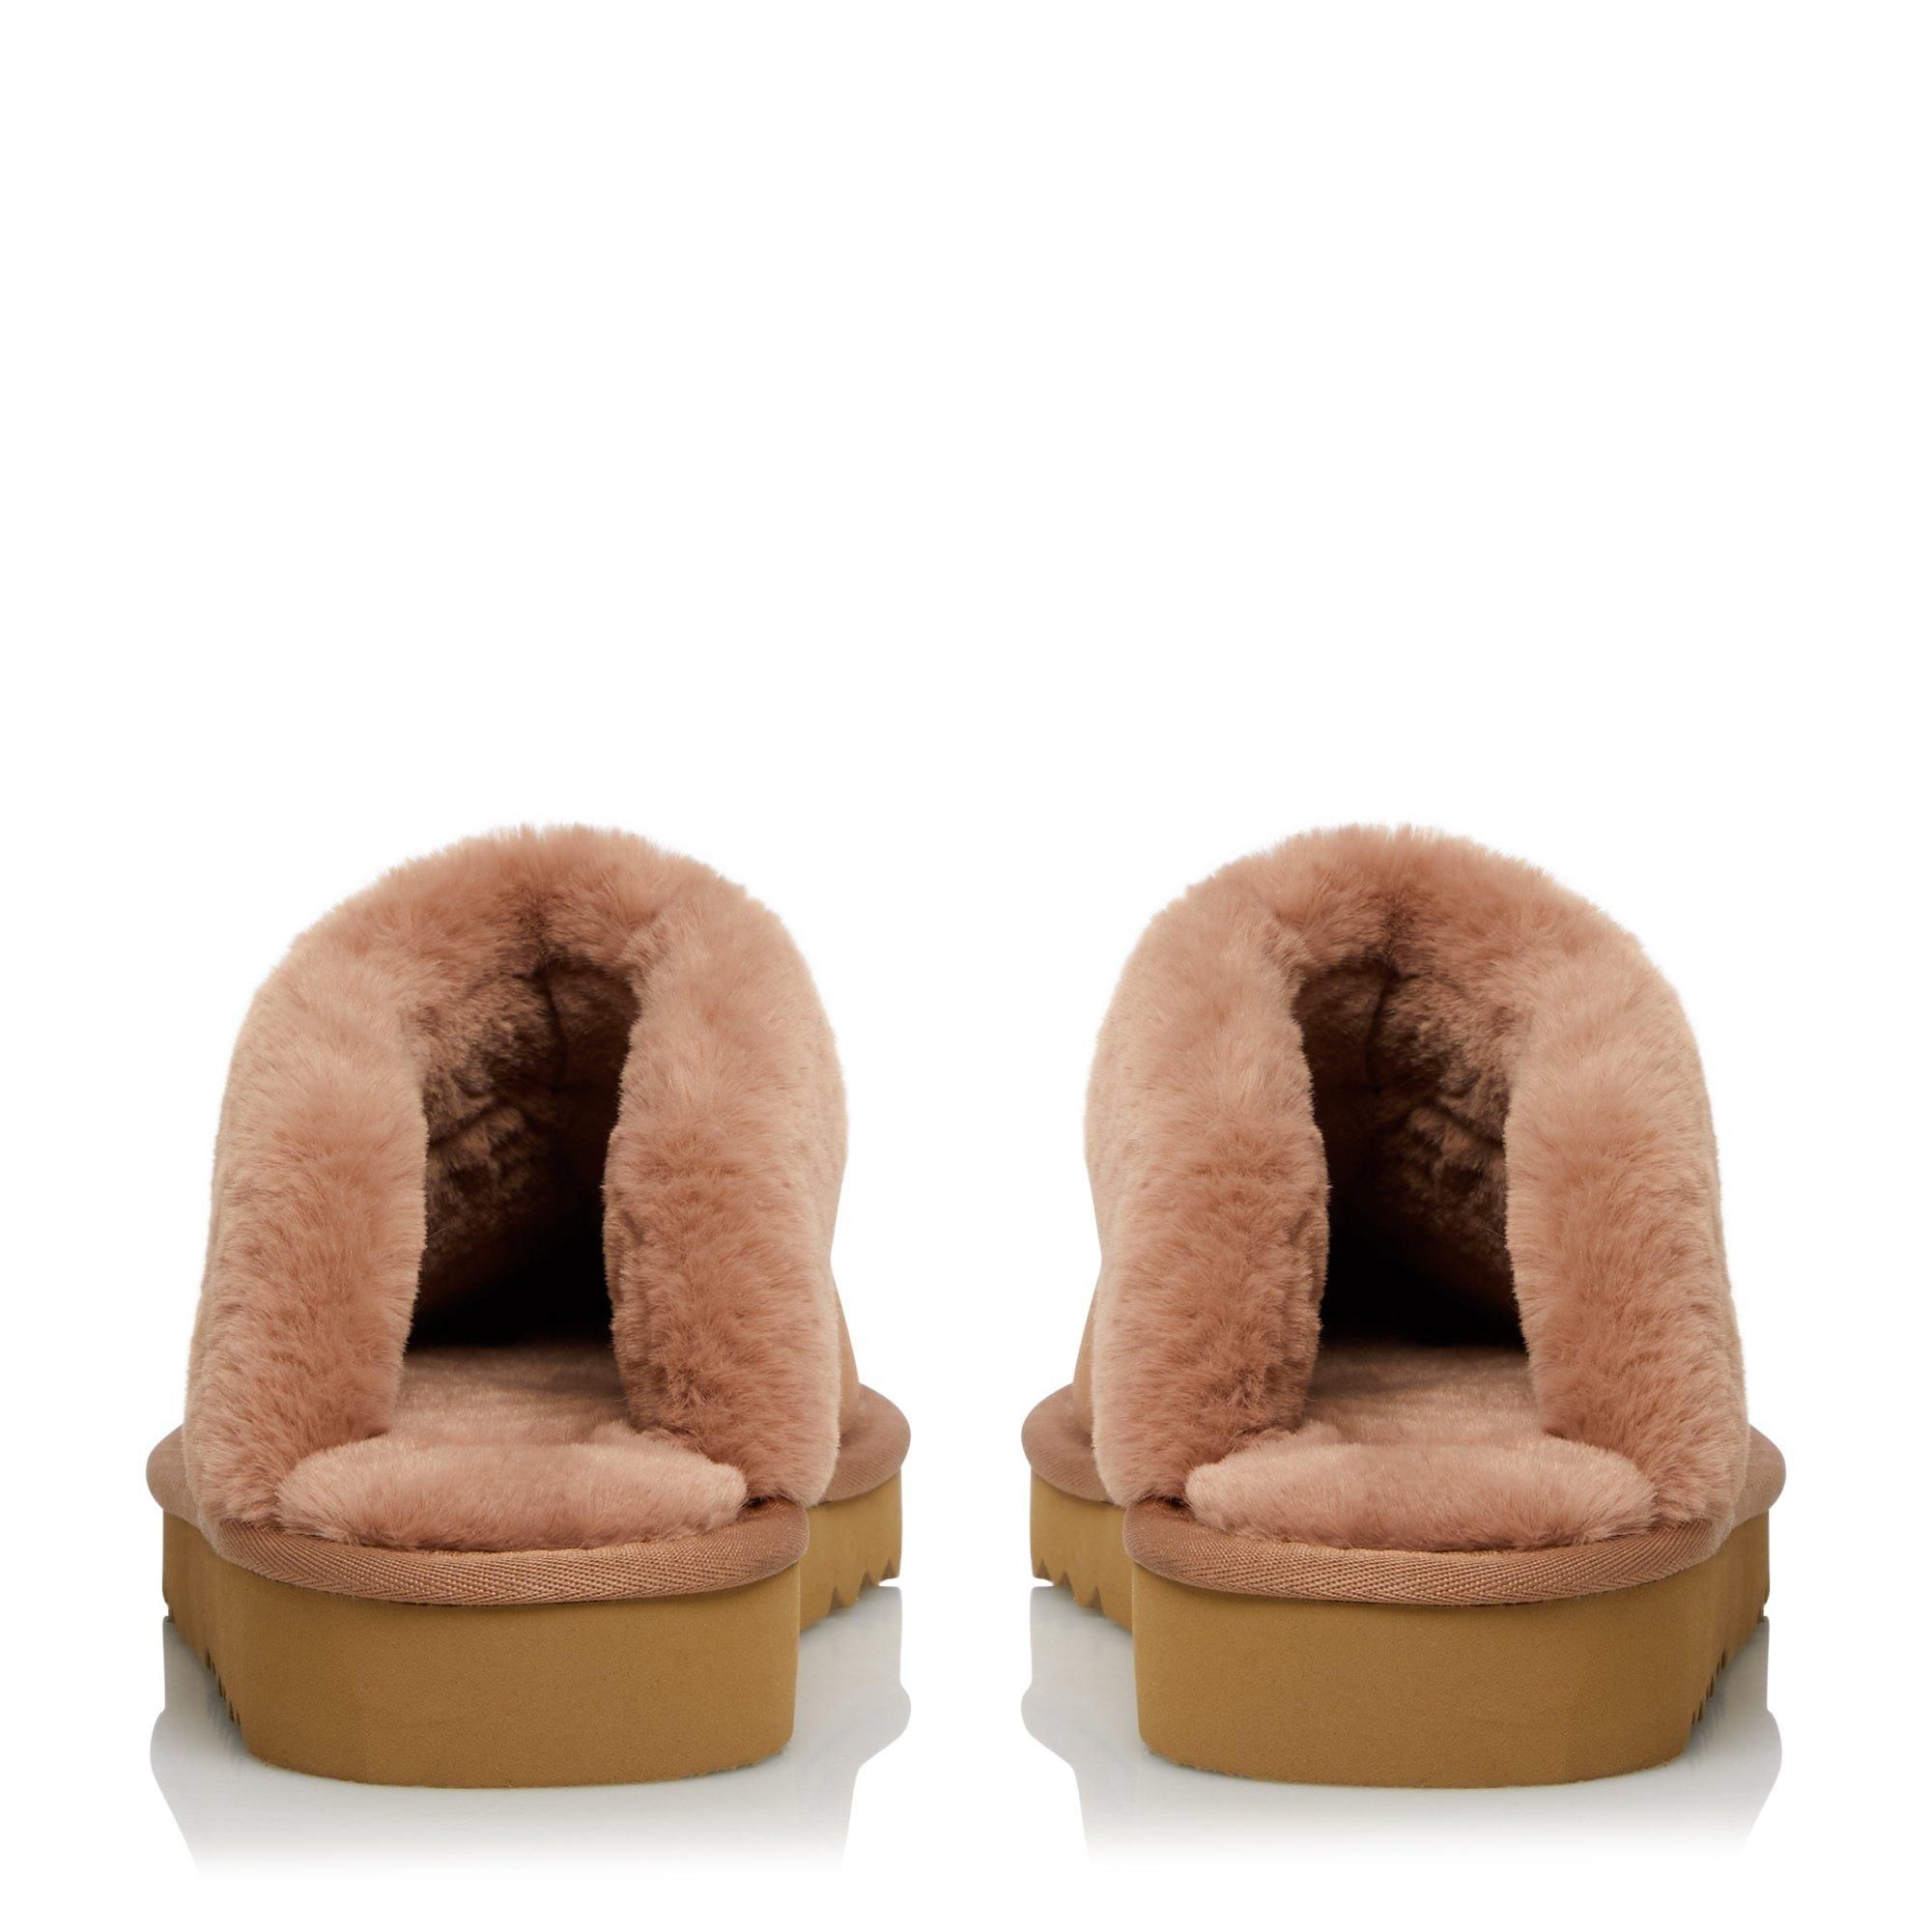 Stay comfy and cosy at home with the Walliss slippers from Bertie. Designed in an easy slip-on mule shape with a chunky sole and rounded toe. They're lined with warm and fluffy shearling.